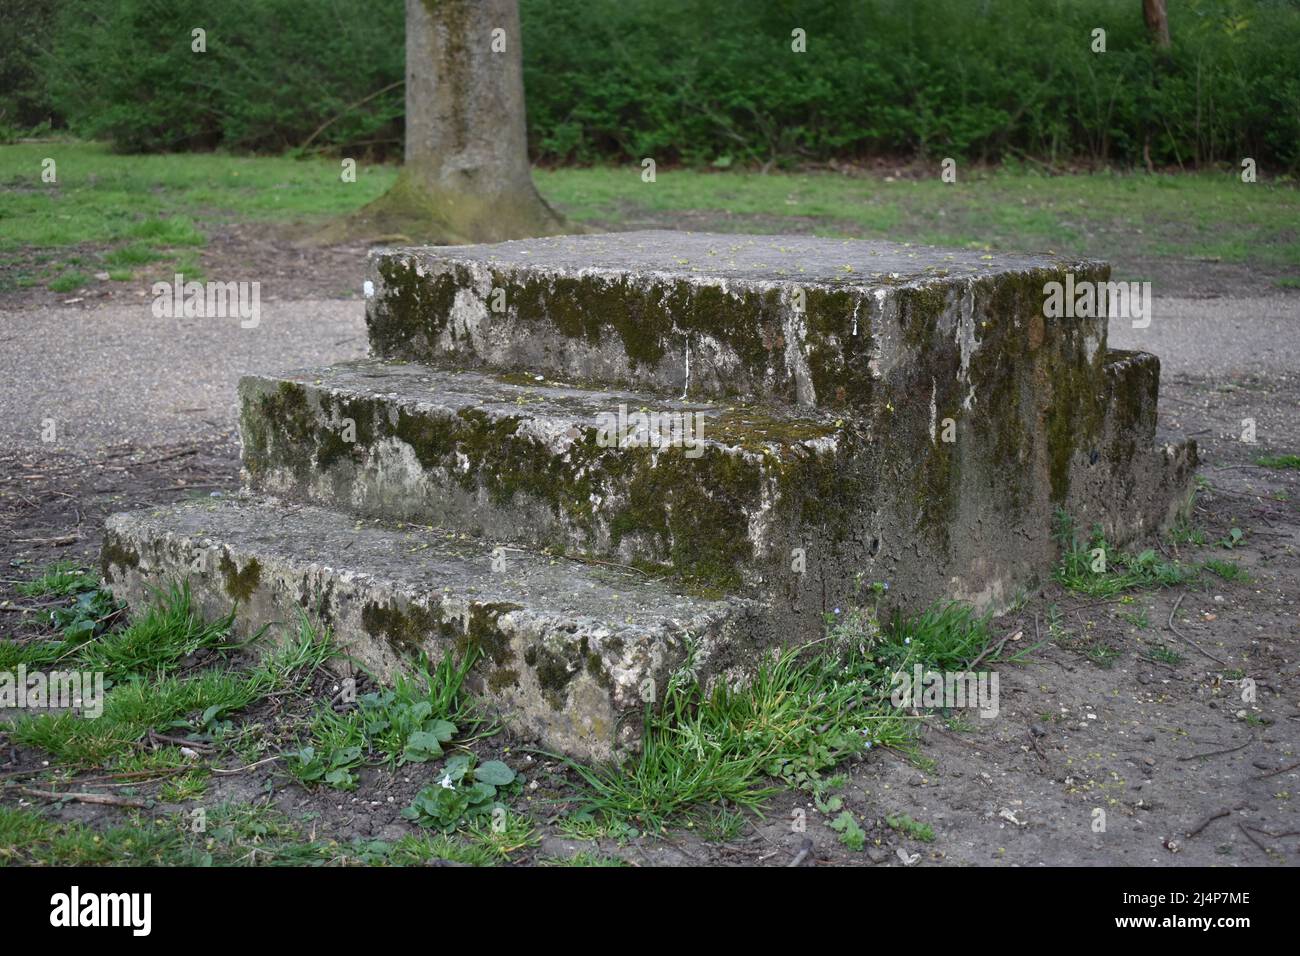 A horse mounting block made of stone in Milton Keynes. Stock Photo